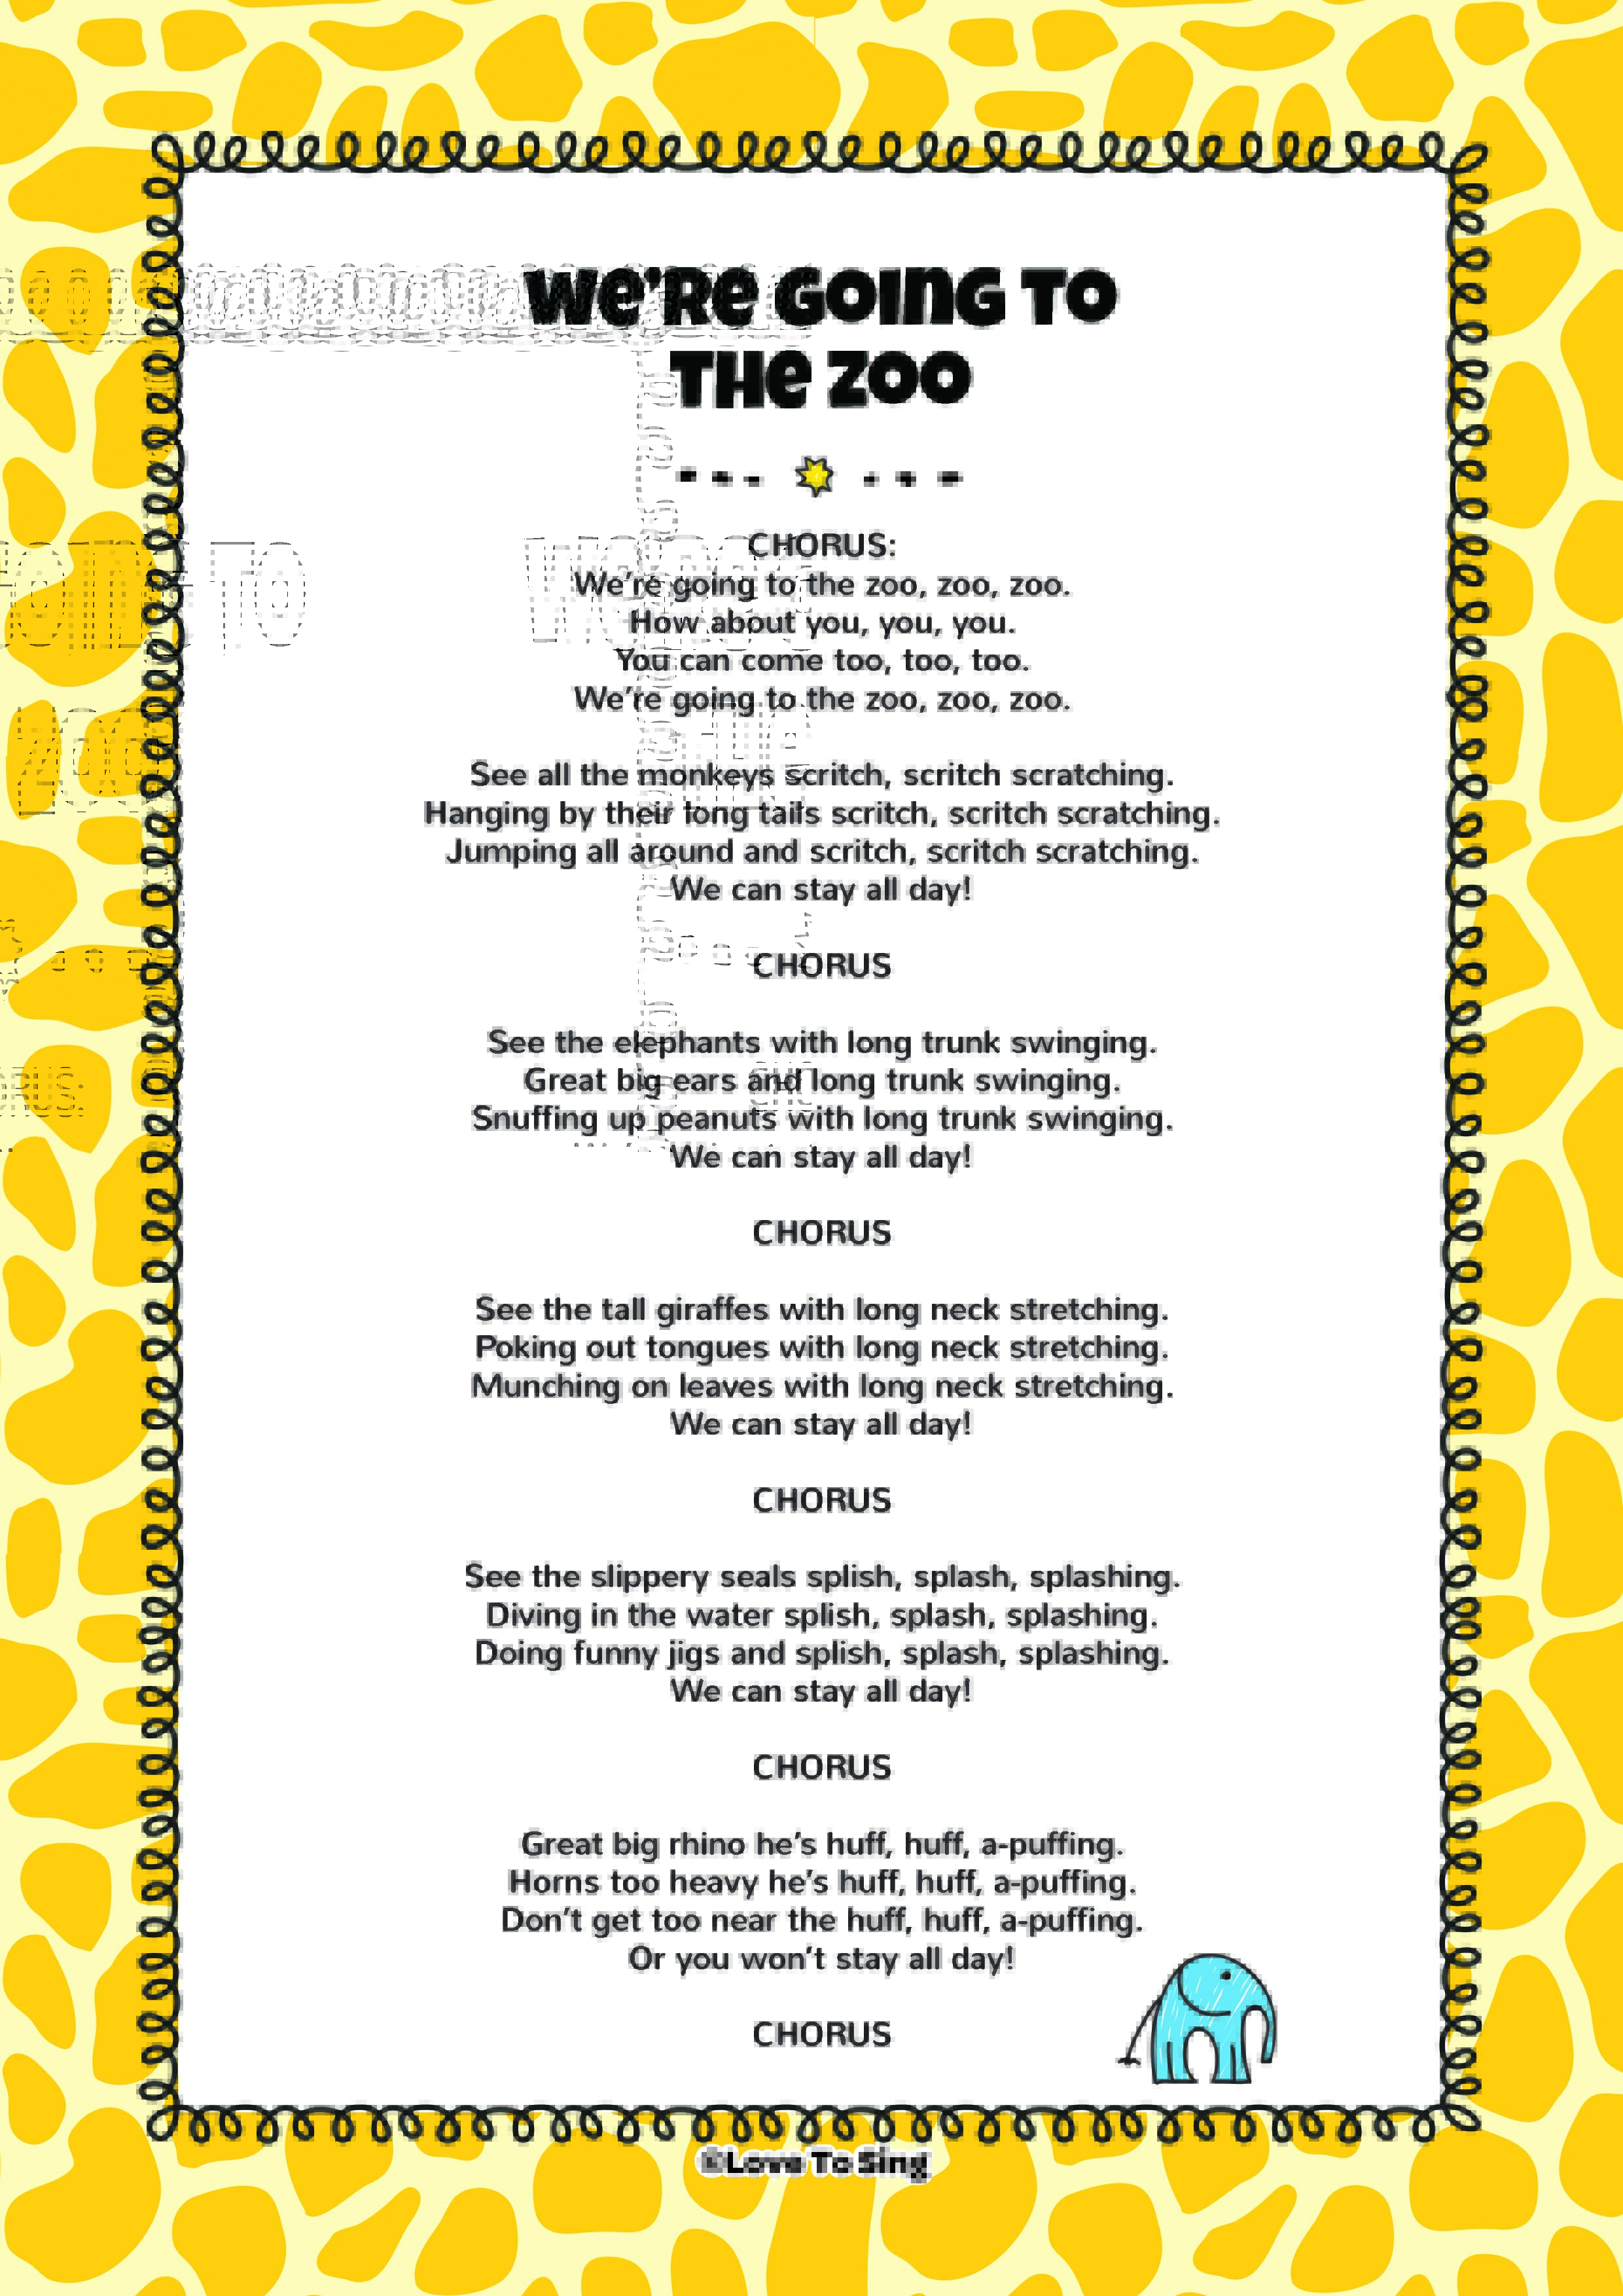 We're Going to the Zoo Song | FREE Video Song & Lyrics